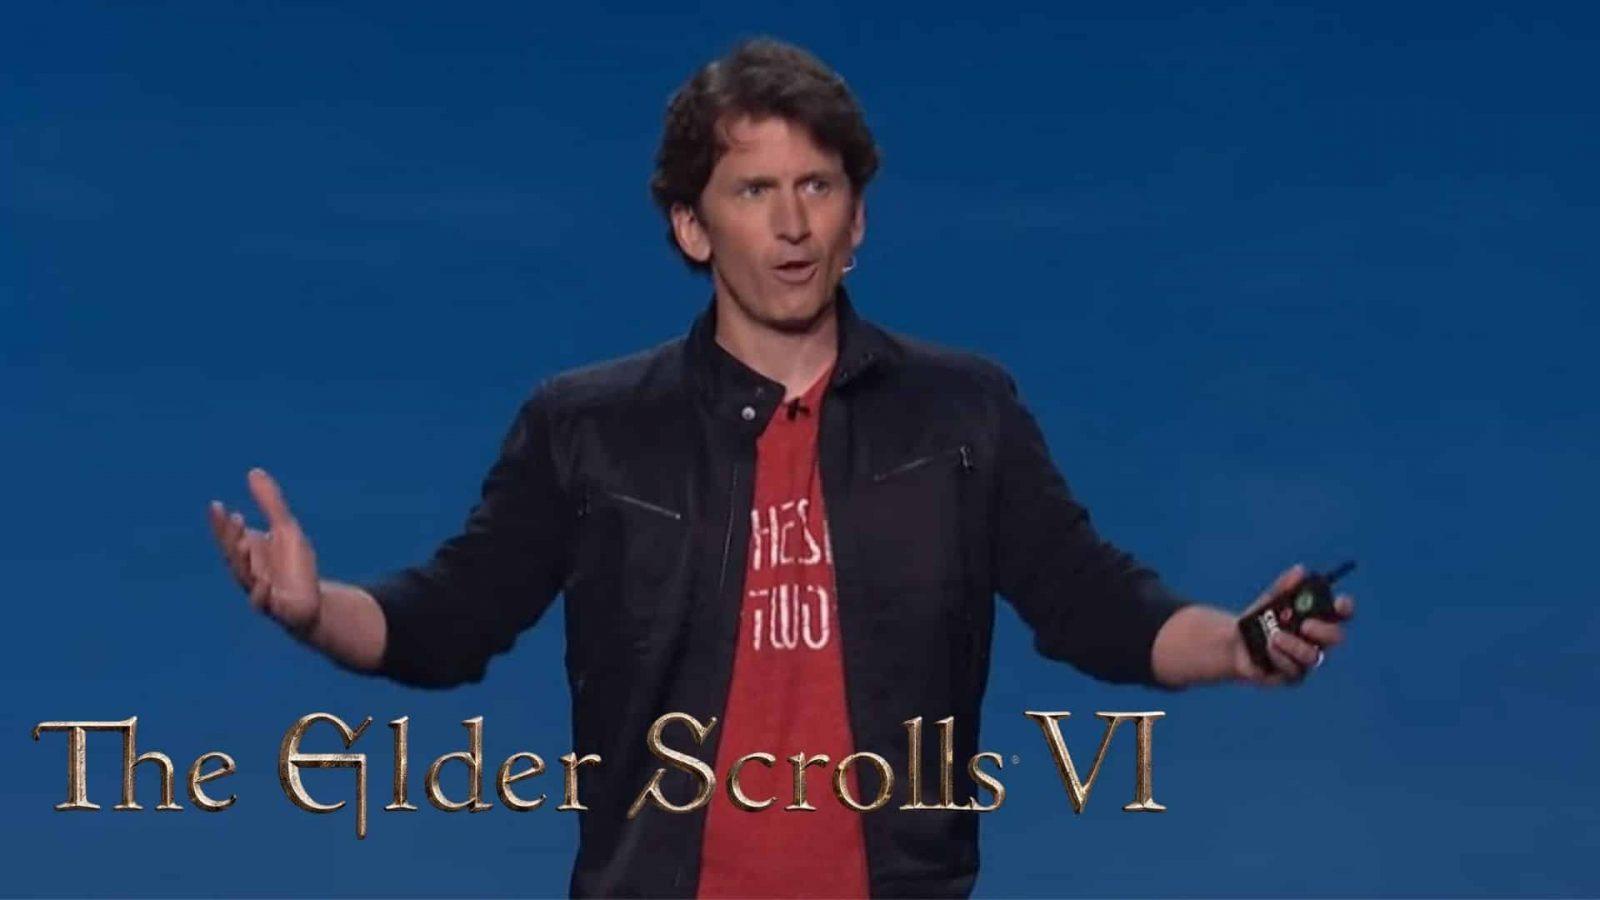 Wish The Elder Scrolls 6 was out now? So does Todd Howard